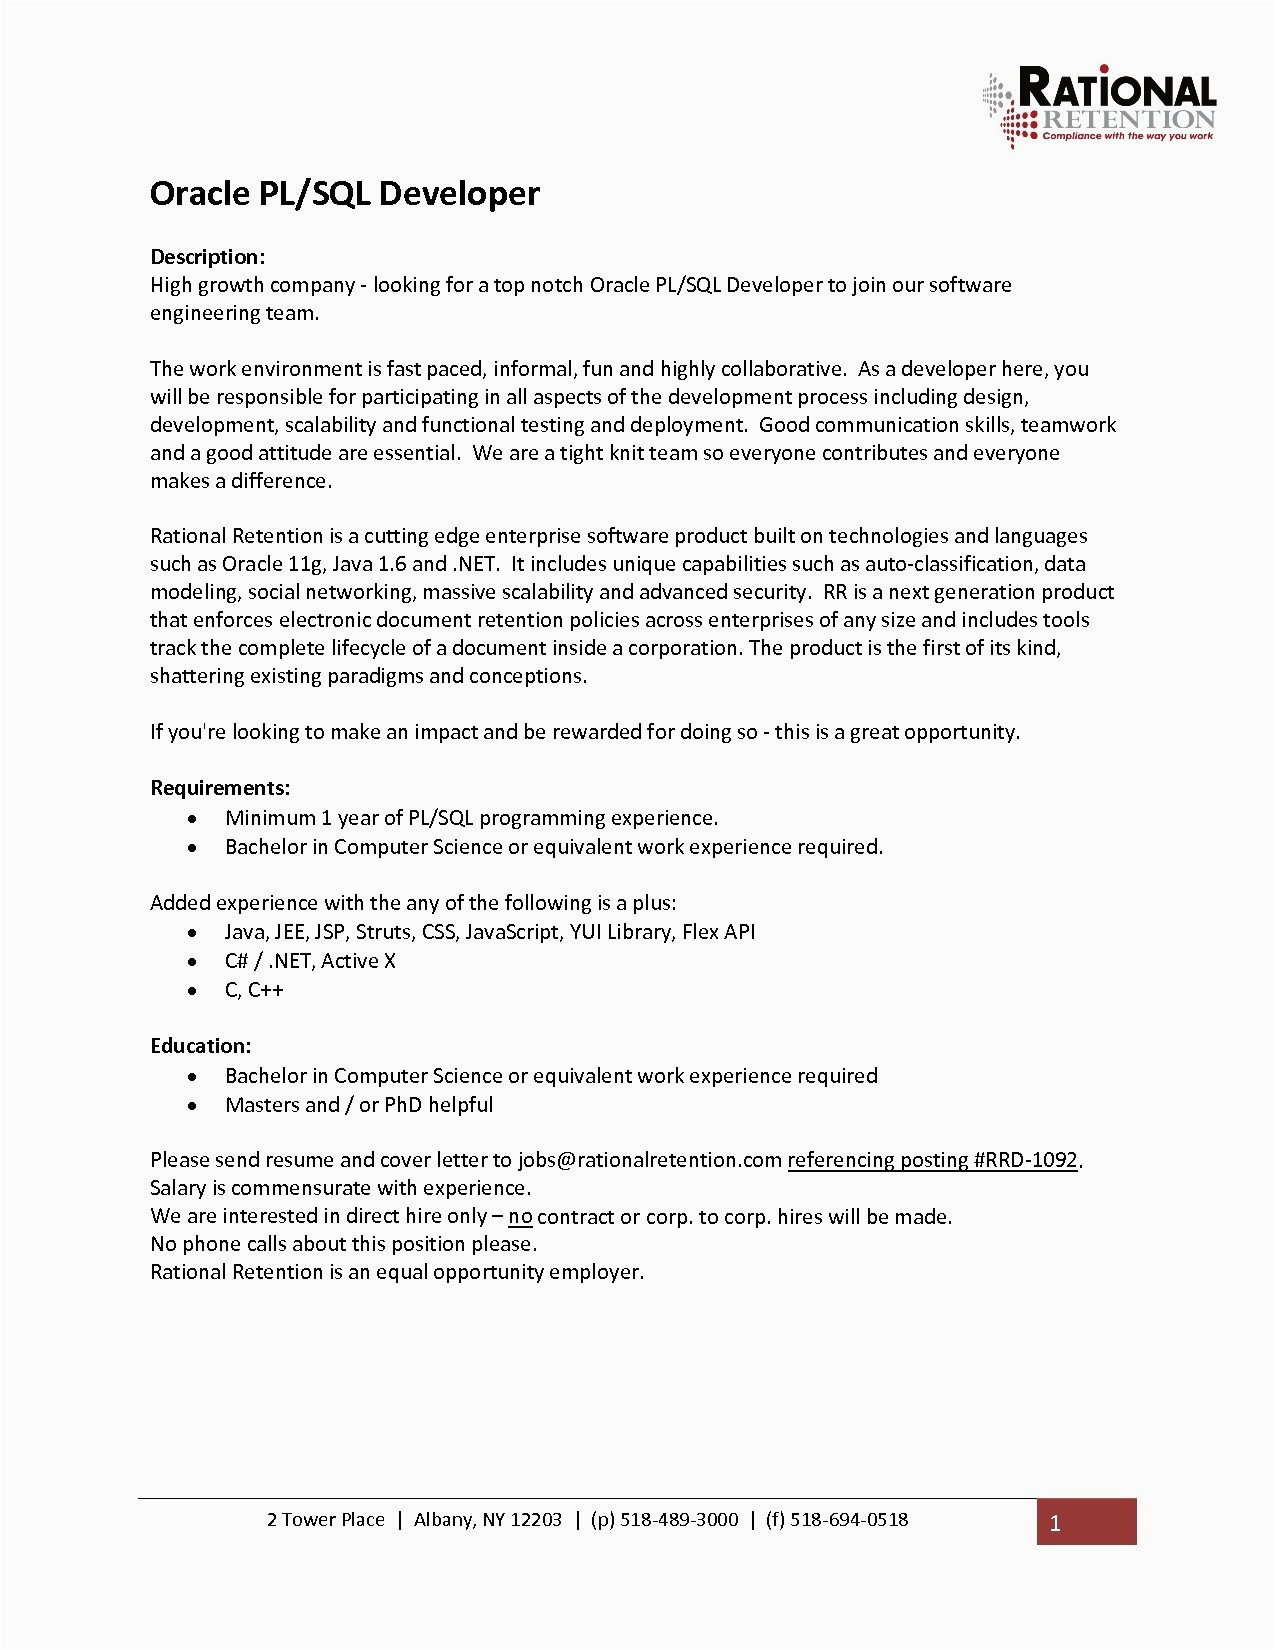 Sample Resume W Experience is One Job for 14 Years Junior software Developer Resume